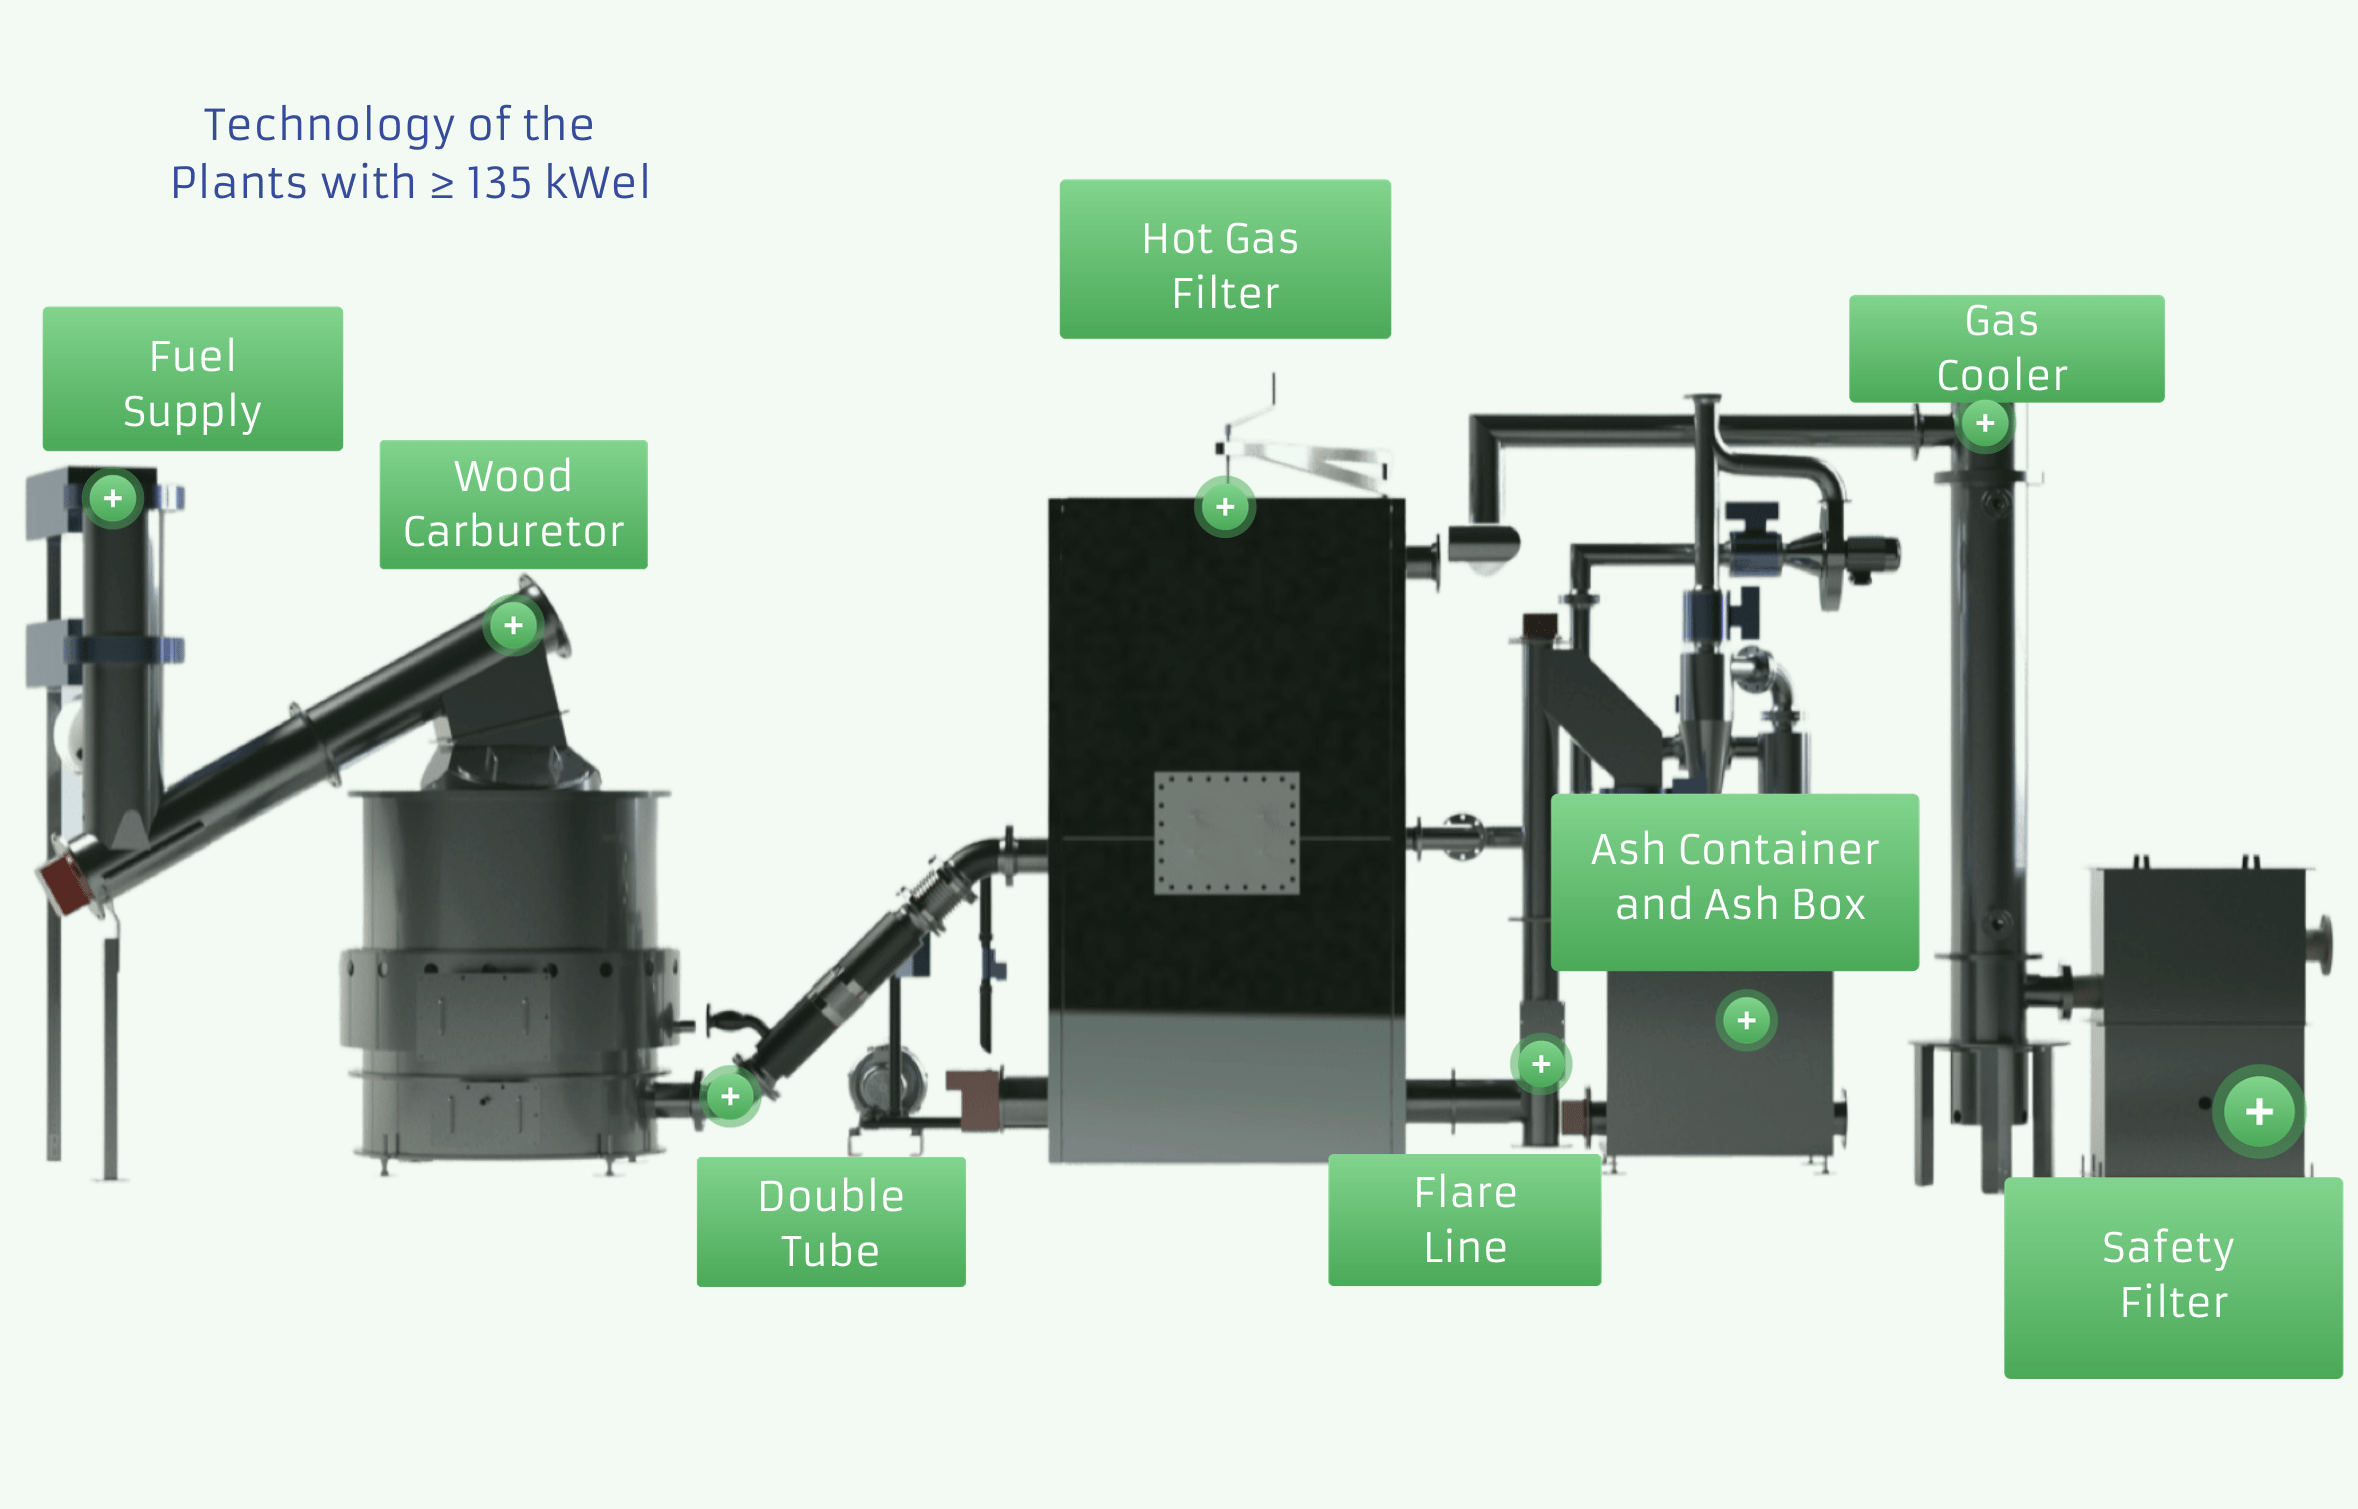 Technology of the 135 kWel Plants